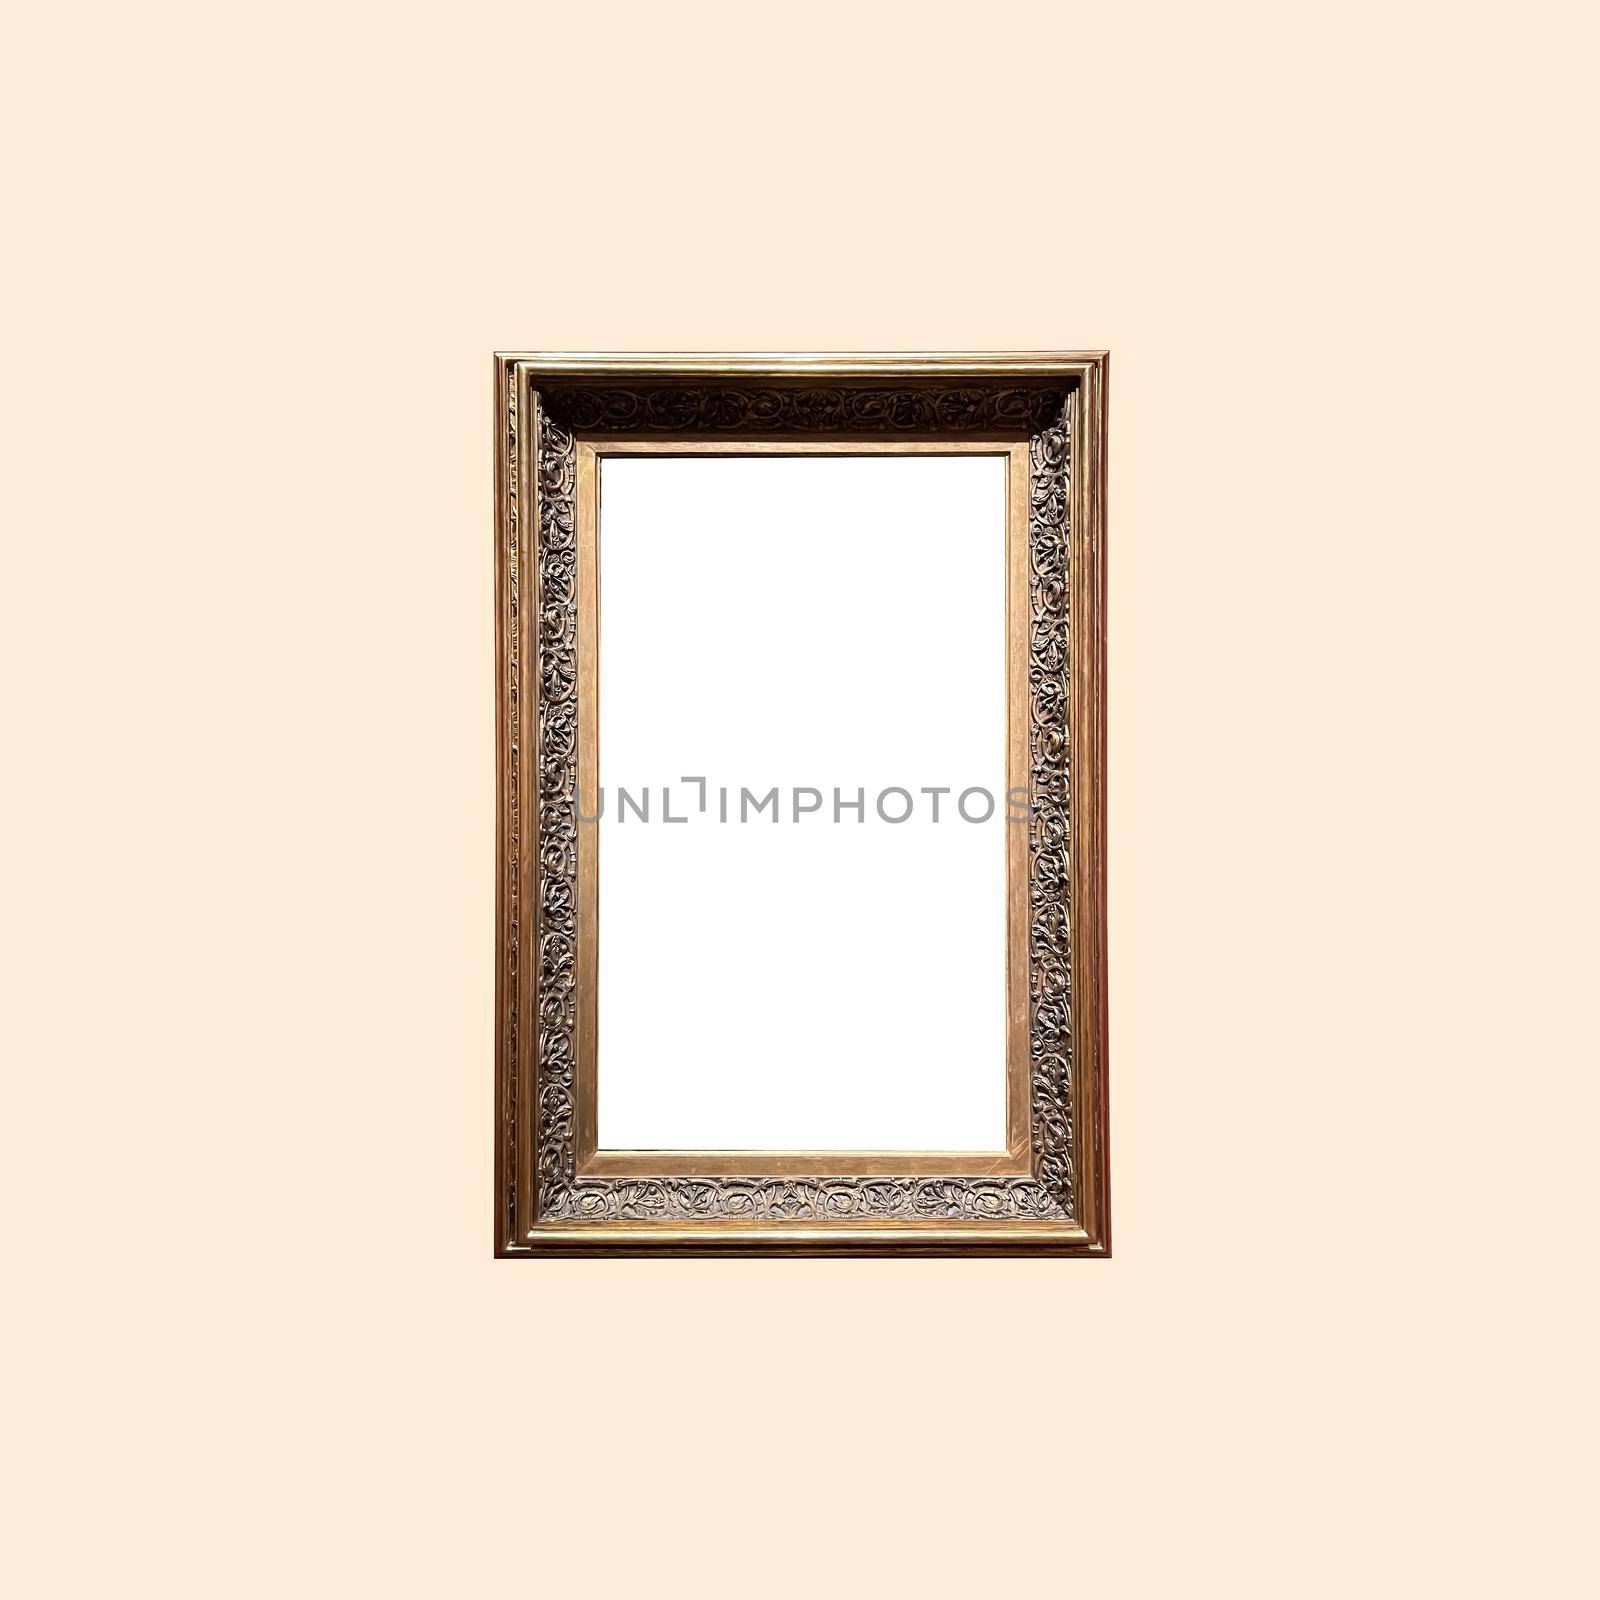 Antique art fair gallery frame on beige wall at auction house or museum exhibition, blank template with empty white copyspace for mockup design, artwork by Anneleven